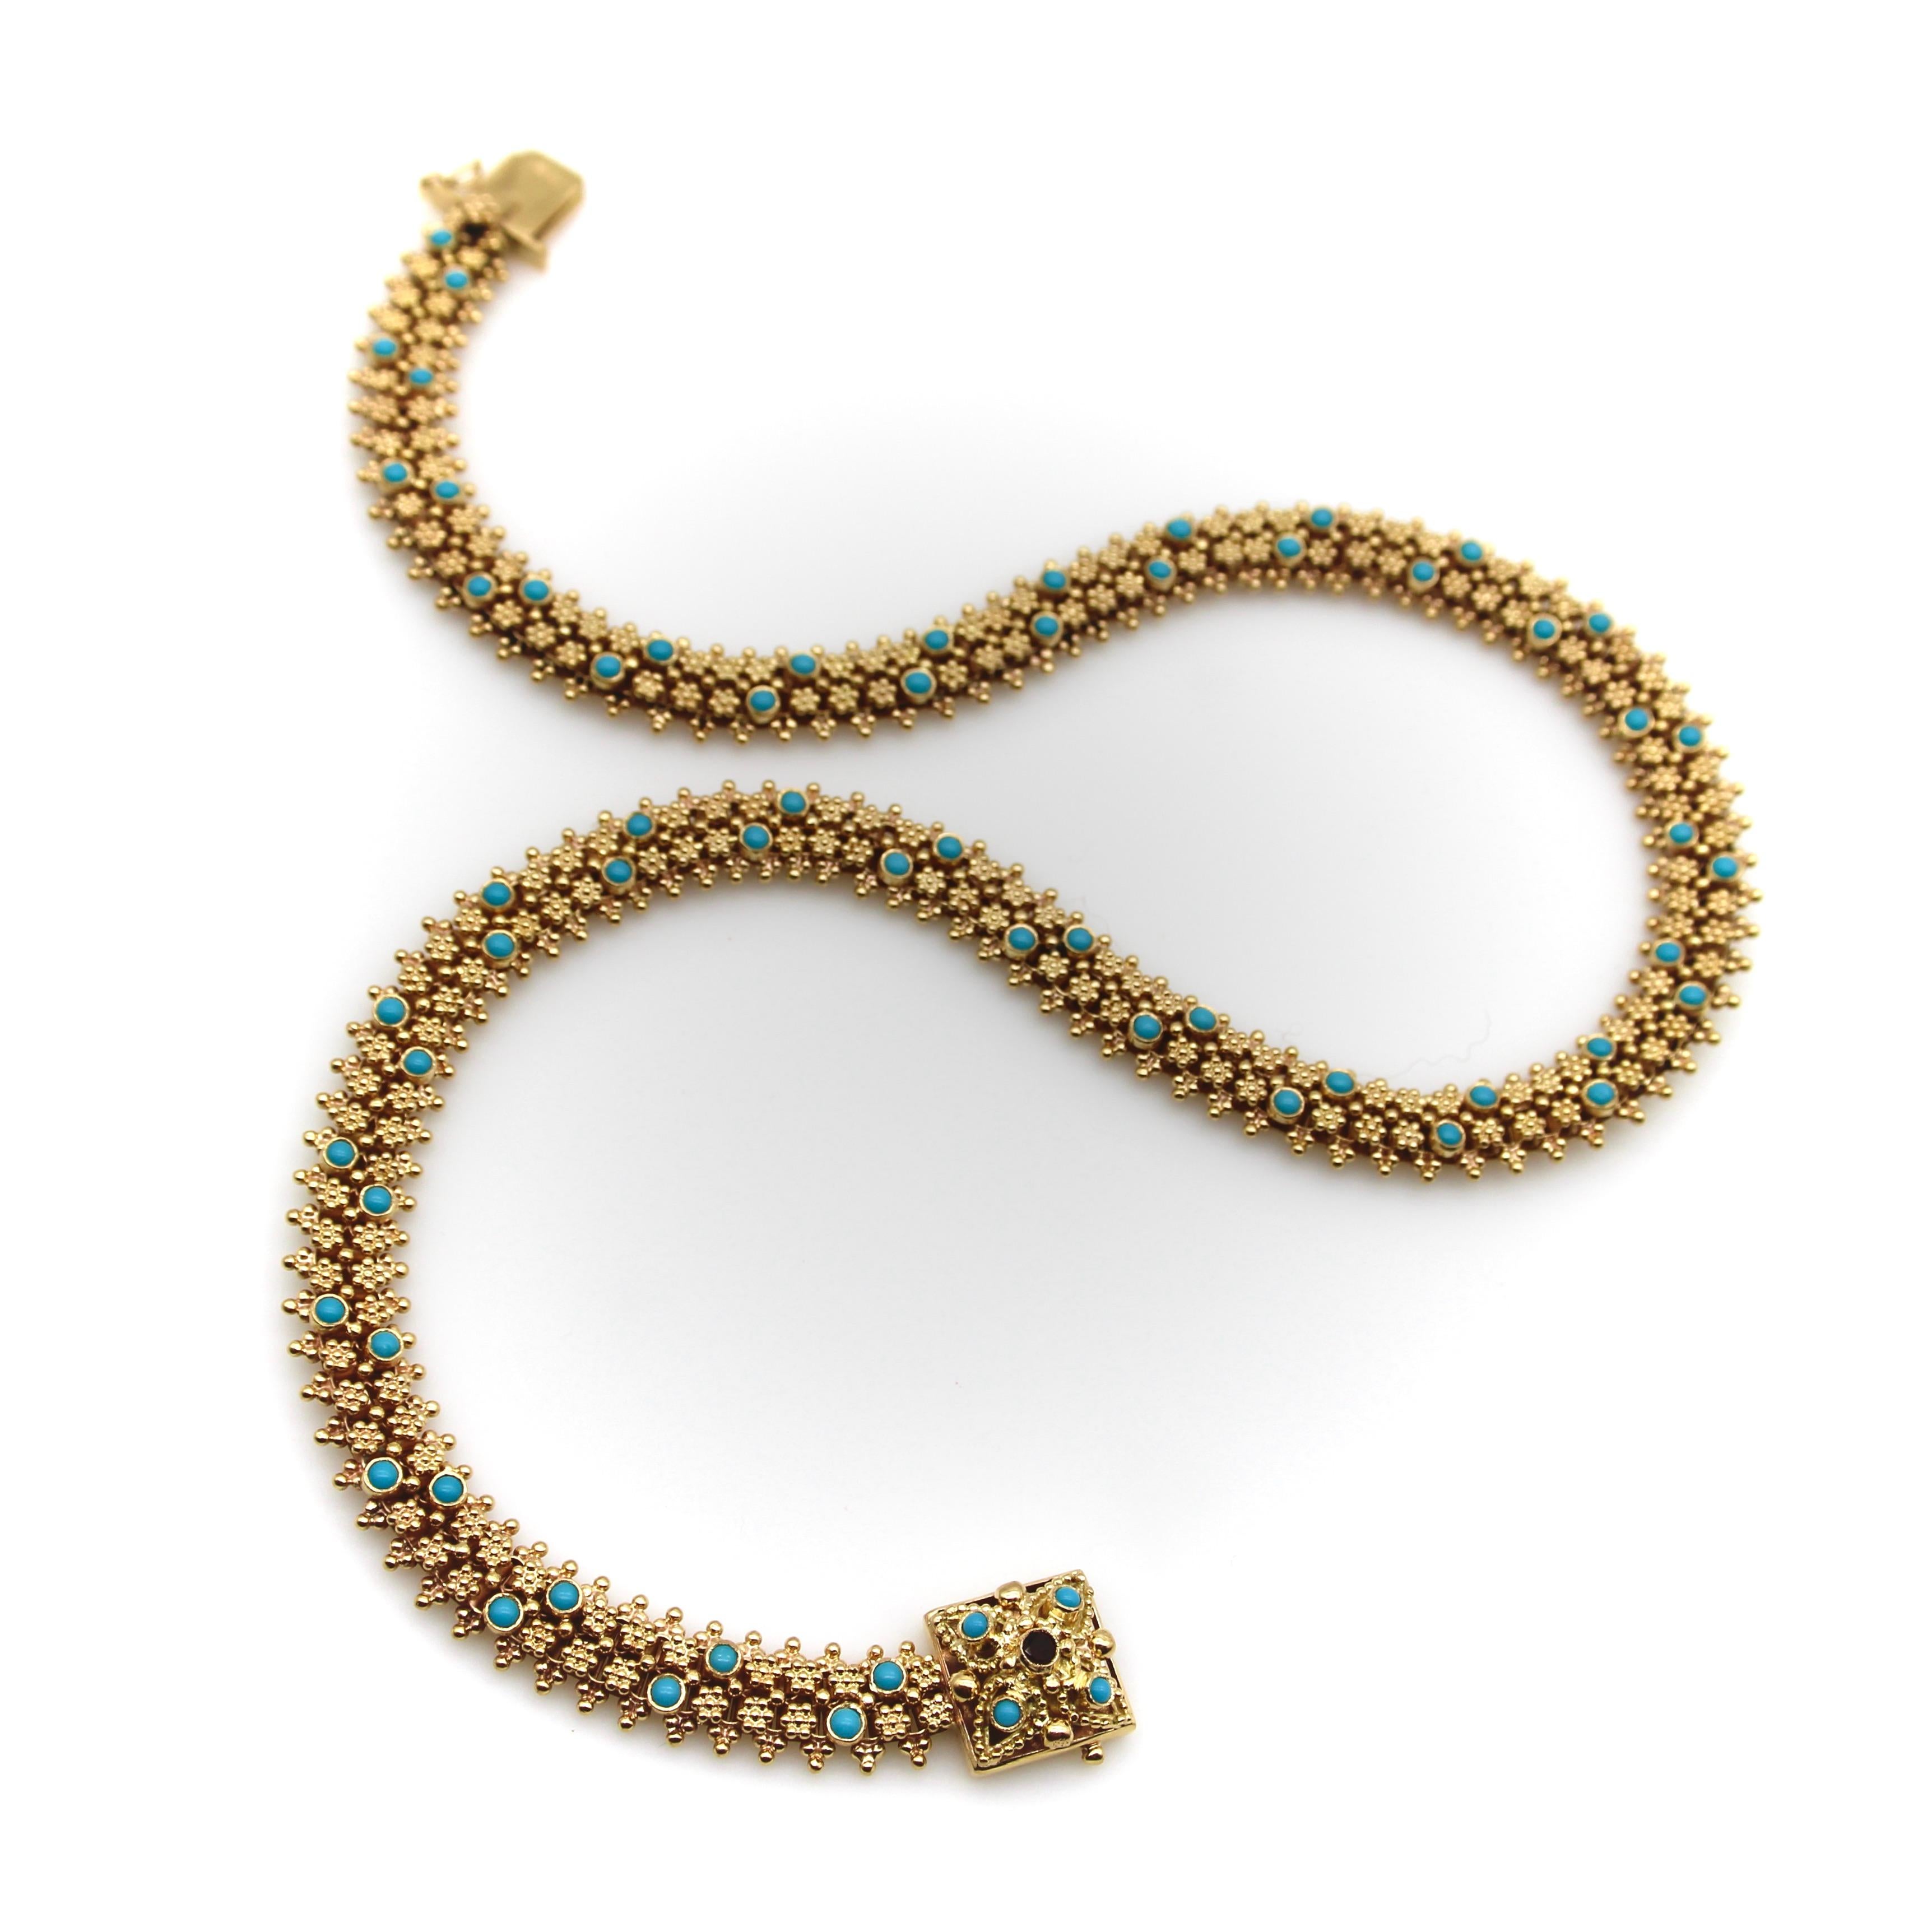 Etruscan Revival Portuguese Cannetille 19.2K Gold & Turquoise Necklace For Sale 2